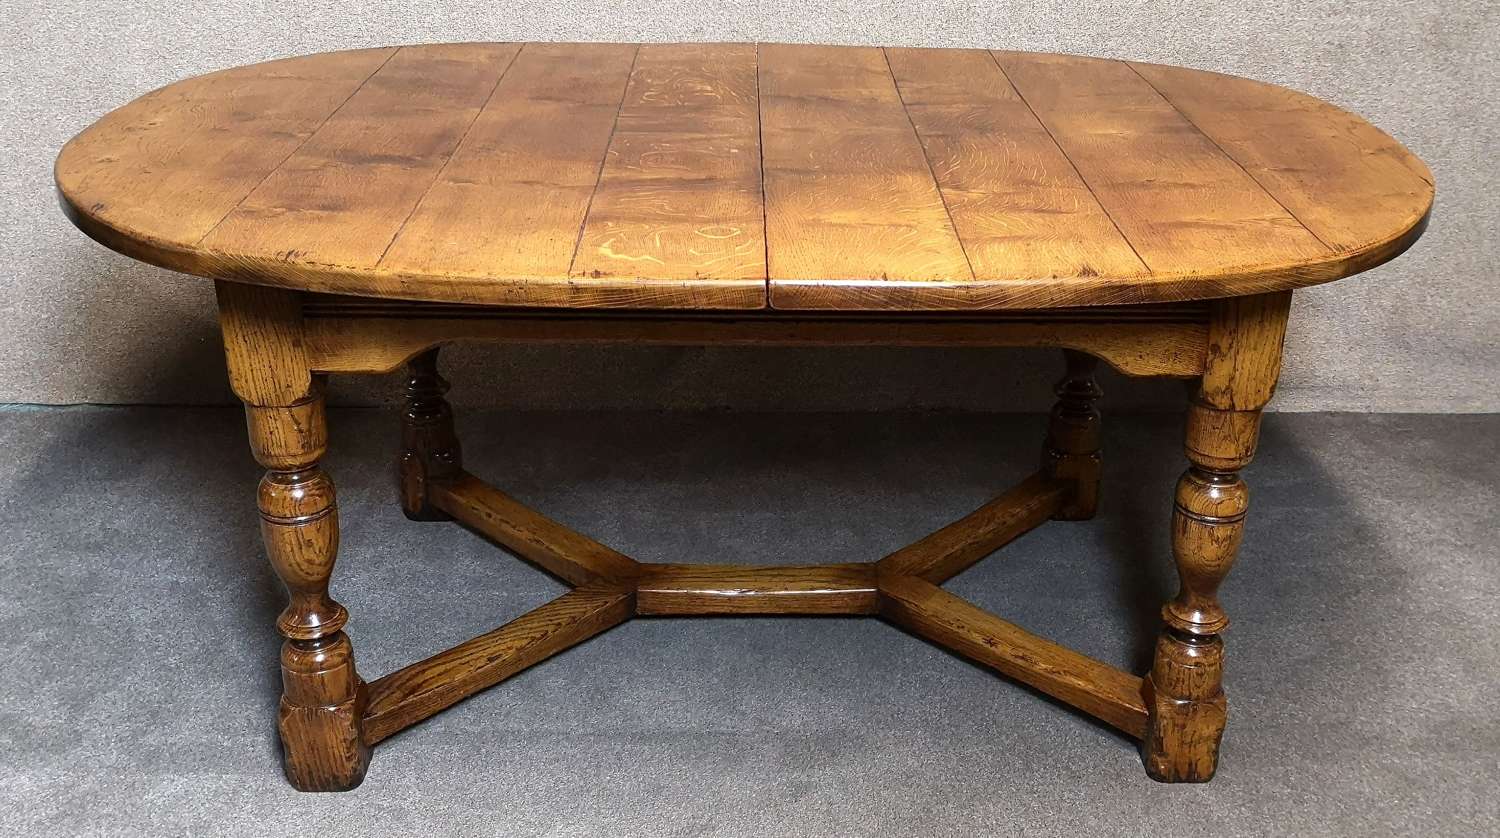 Good Quality Oak Reproduction Extending Dining Table - Capable of Seat